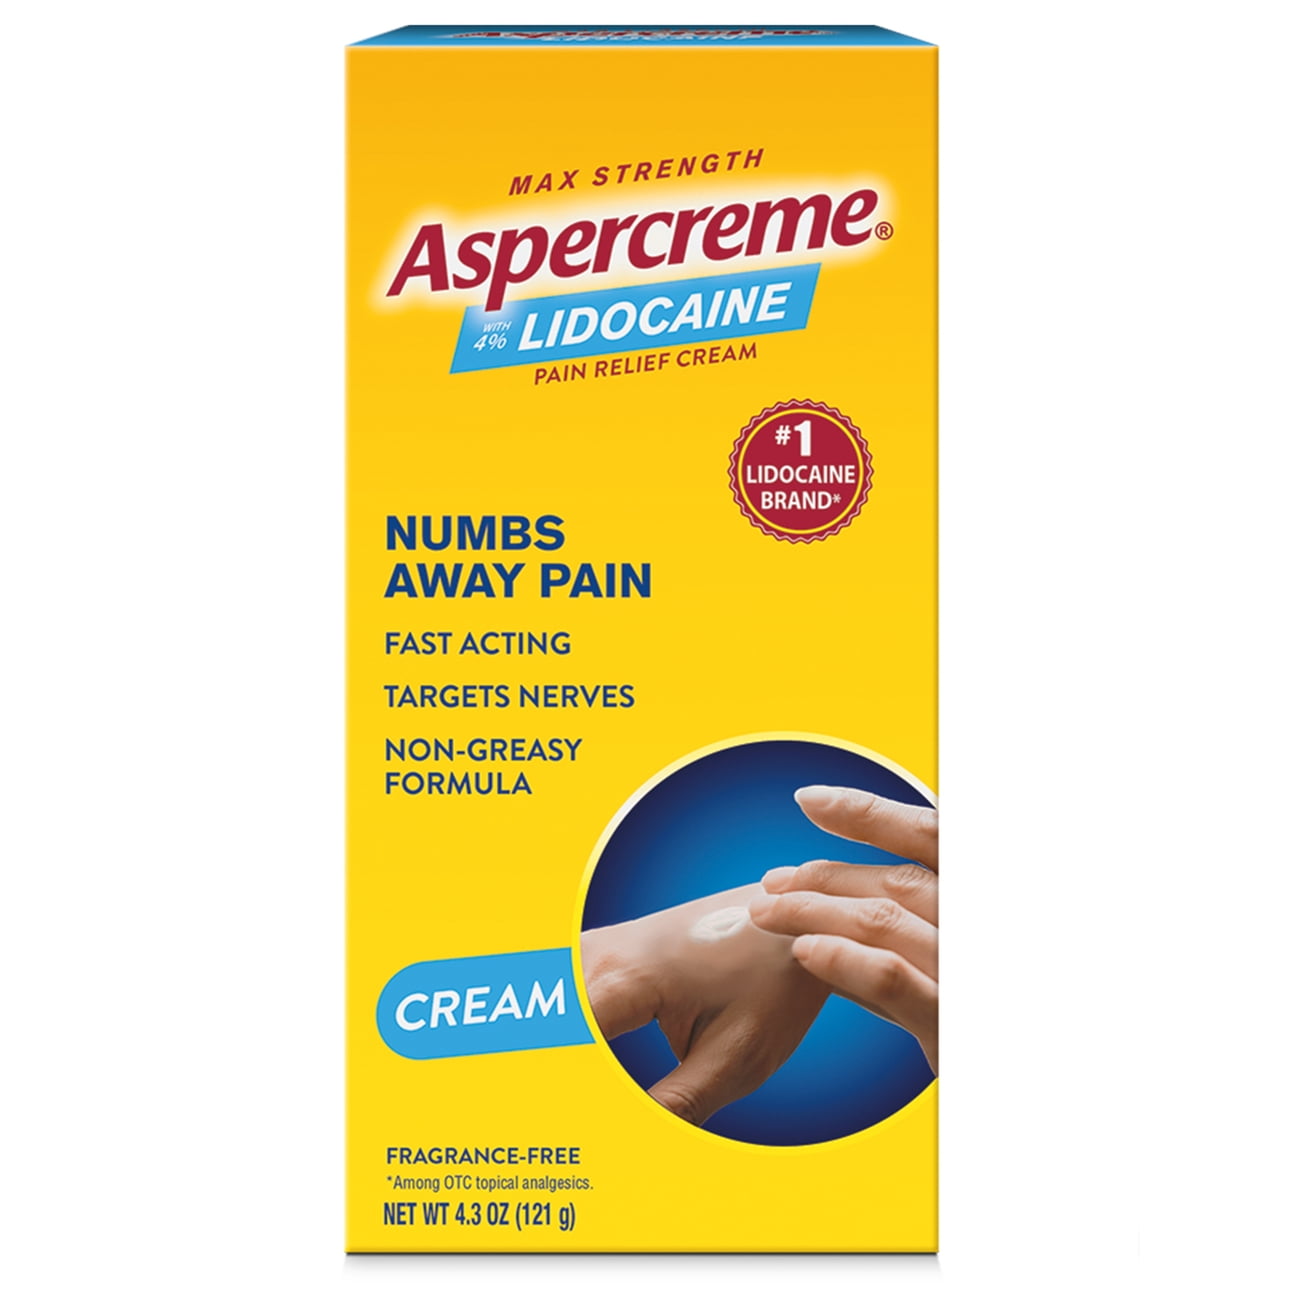 Aspercreme Max Strength Topical Pain Reliever Cream and Muscle Rub for Nerve Pain Relief, 4% Lidocaine Numbing Cream, 4.3 oz - image 1 of 6